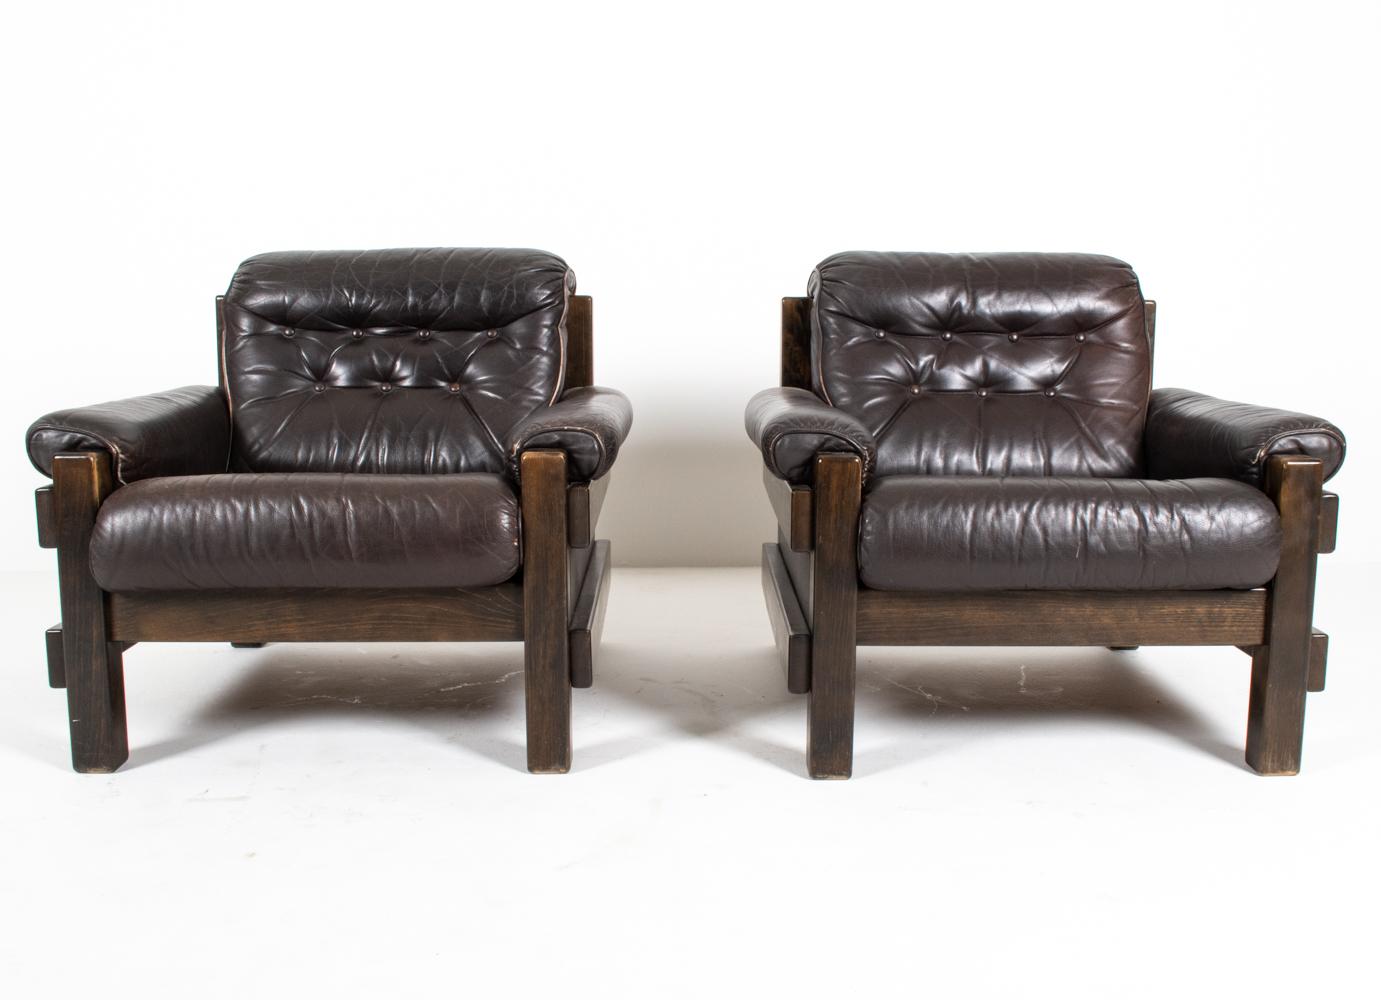 Scandinavian Modern Pair of Swedish Mid-Century Tufted Leather Lounge Chairs by Ikea, 1970's For Sale